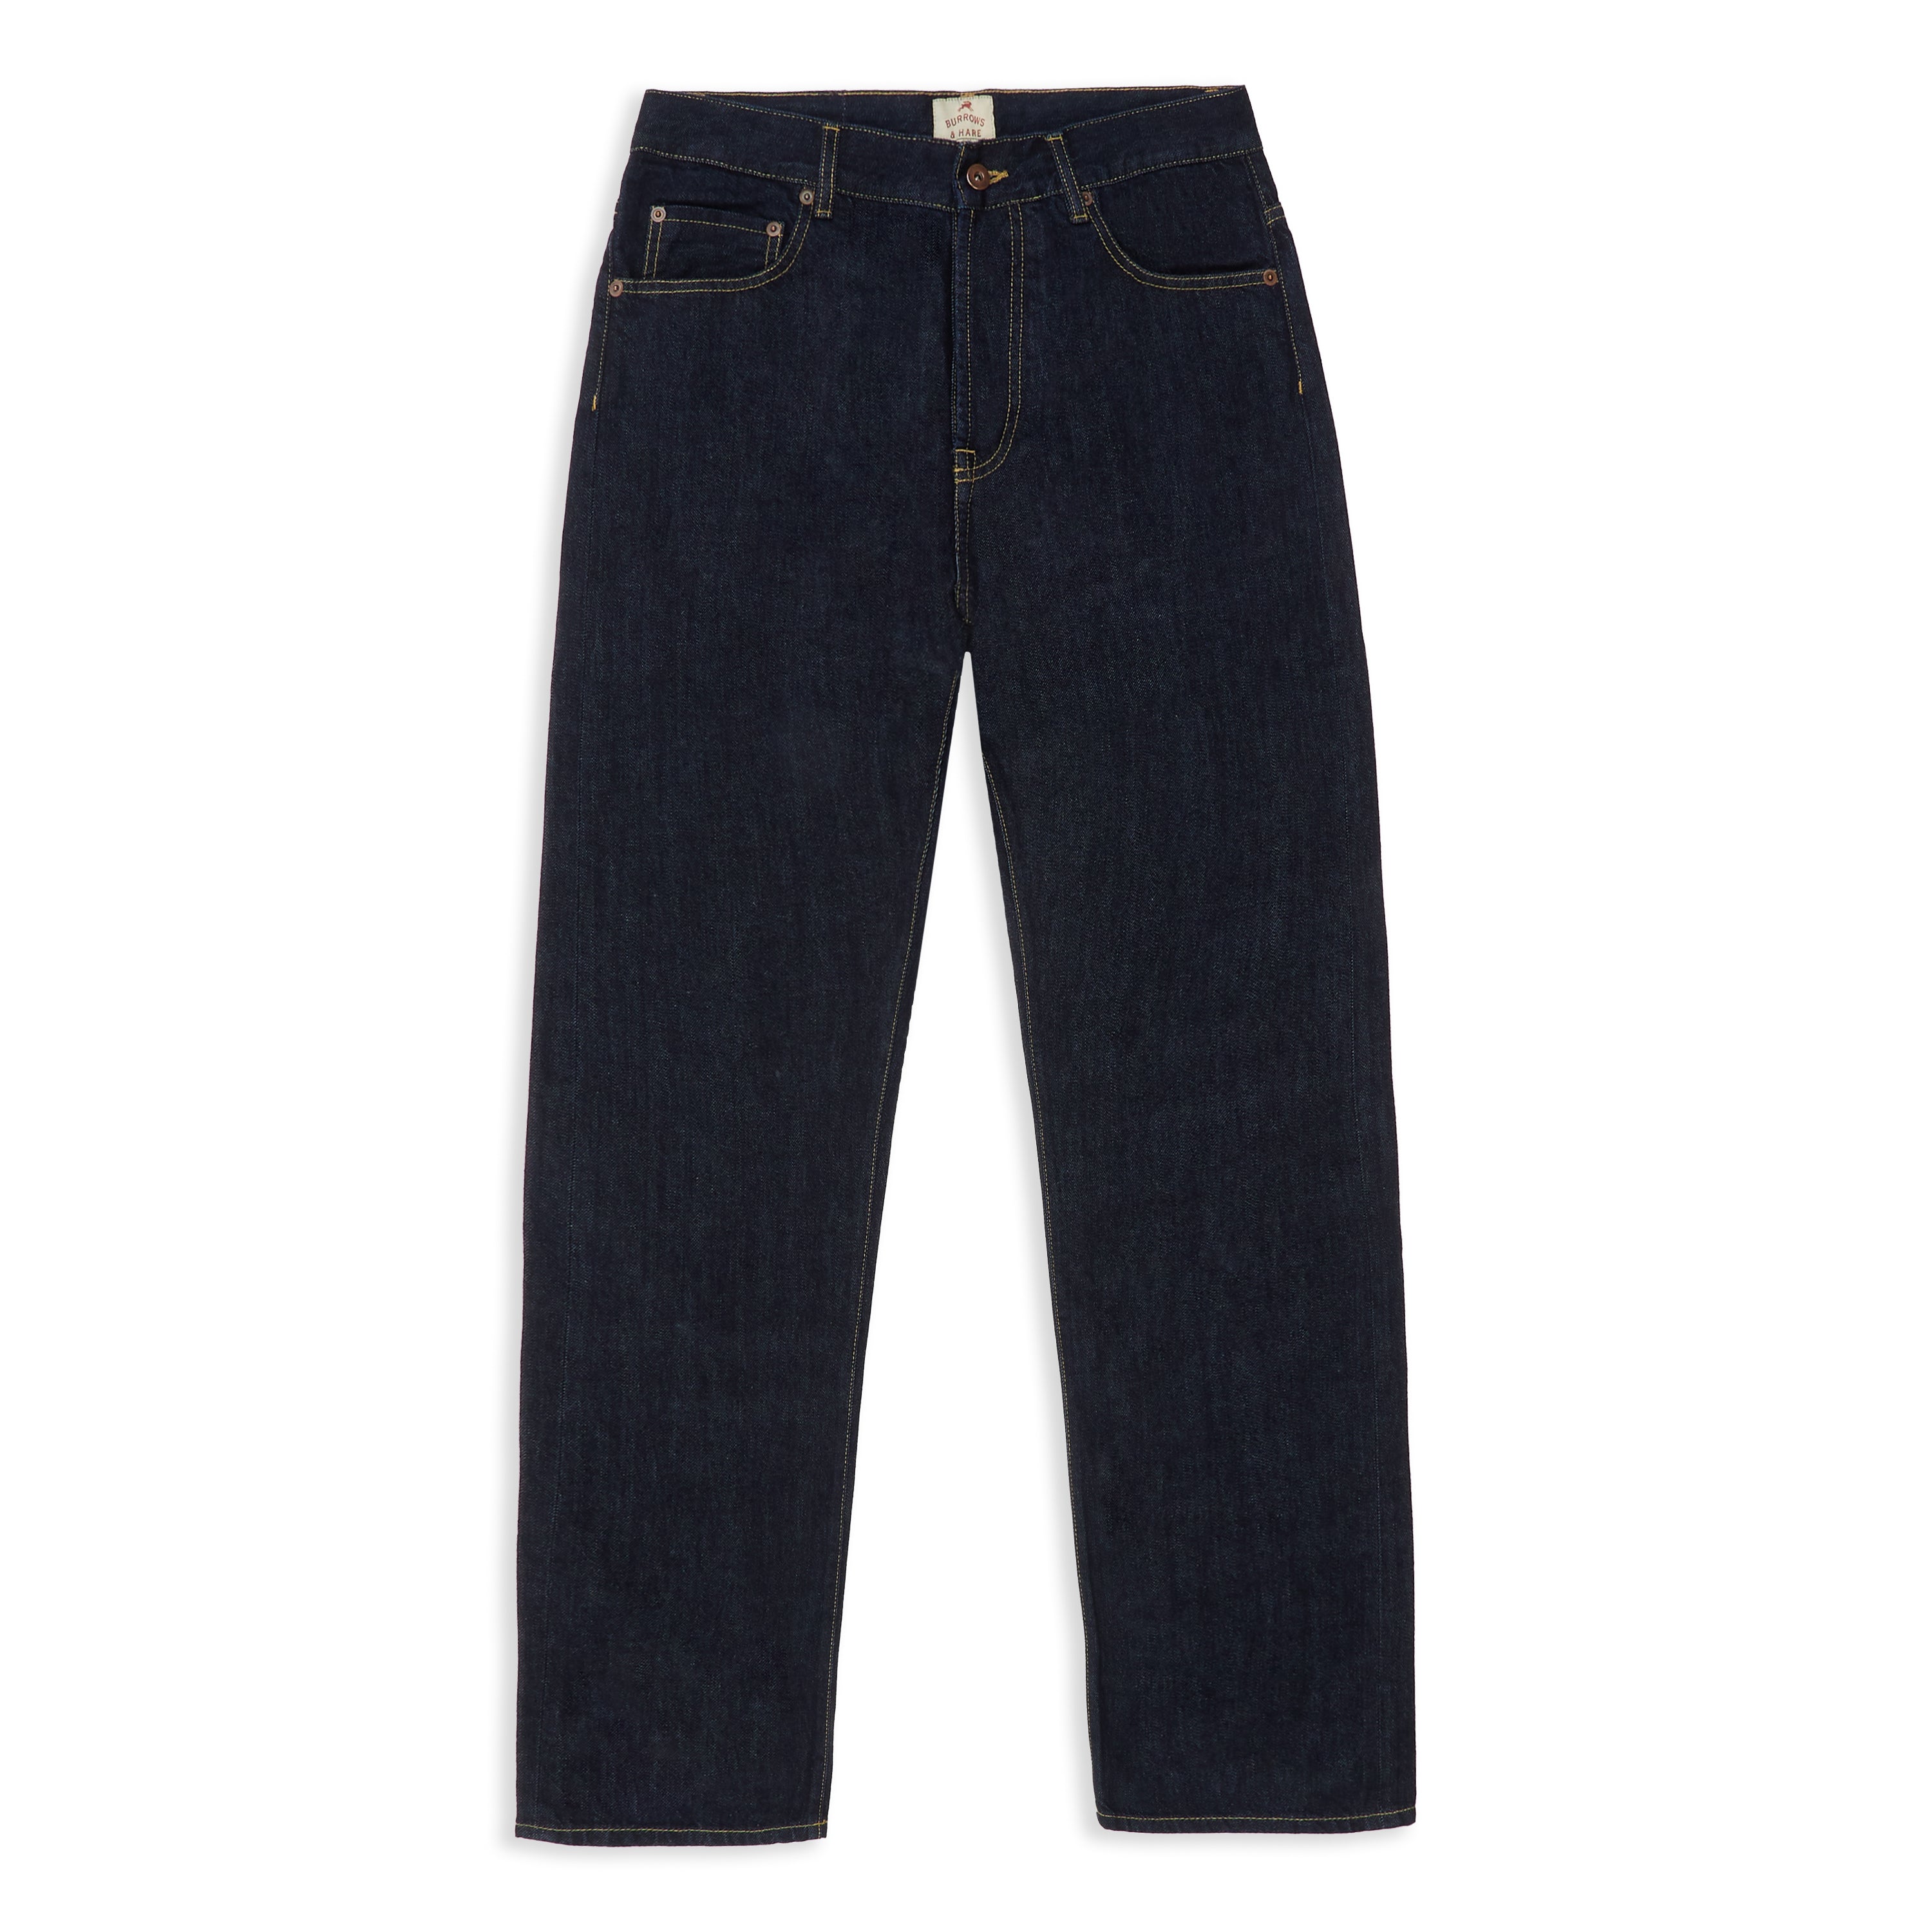 Burrows & Hare  Slim Jeans - Rinse Wash